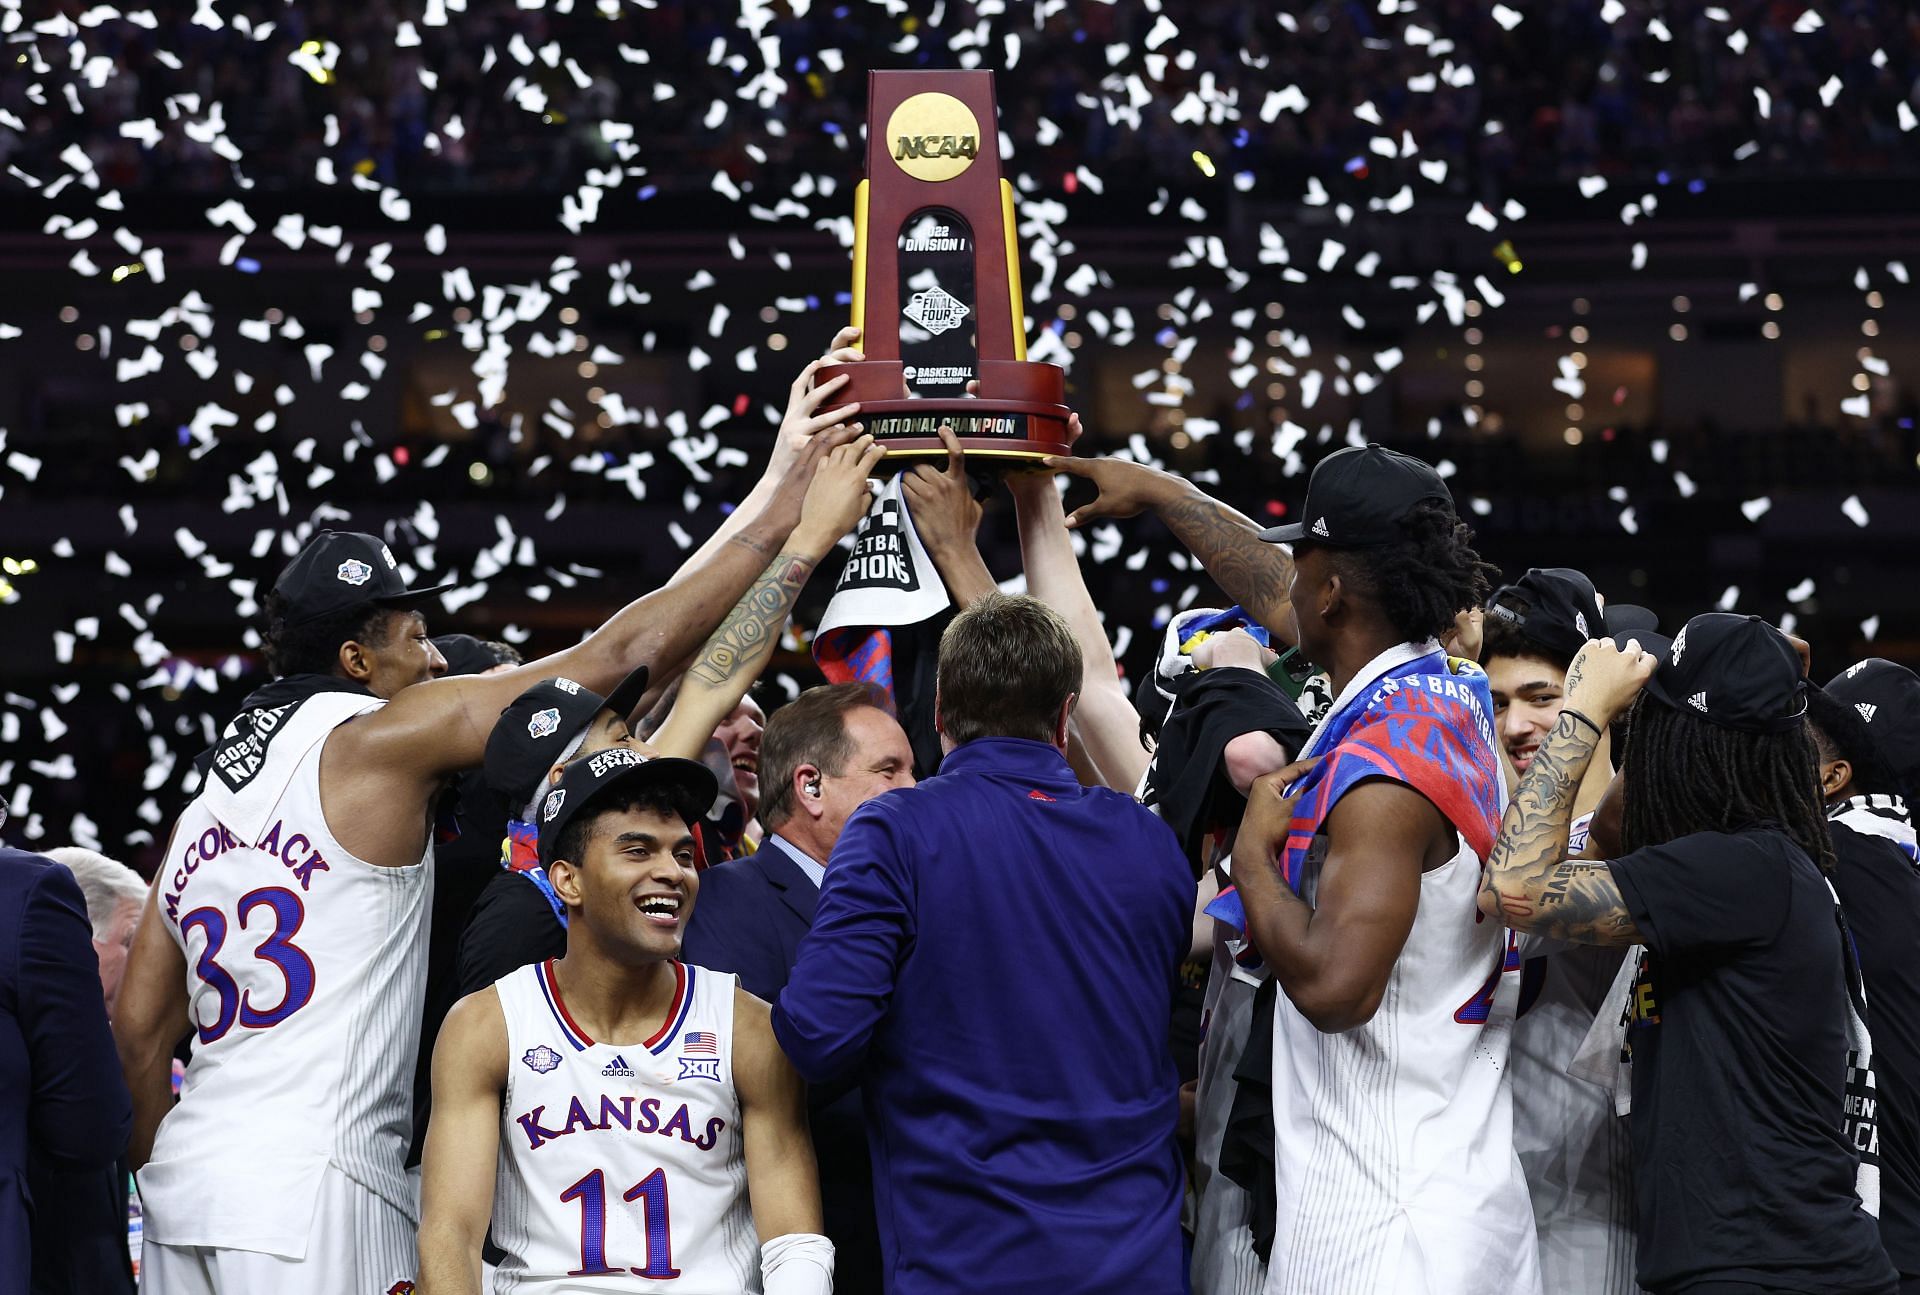 The Kansas Jayhawks after their March Madness victory over North Carolina